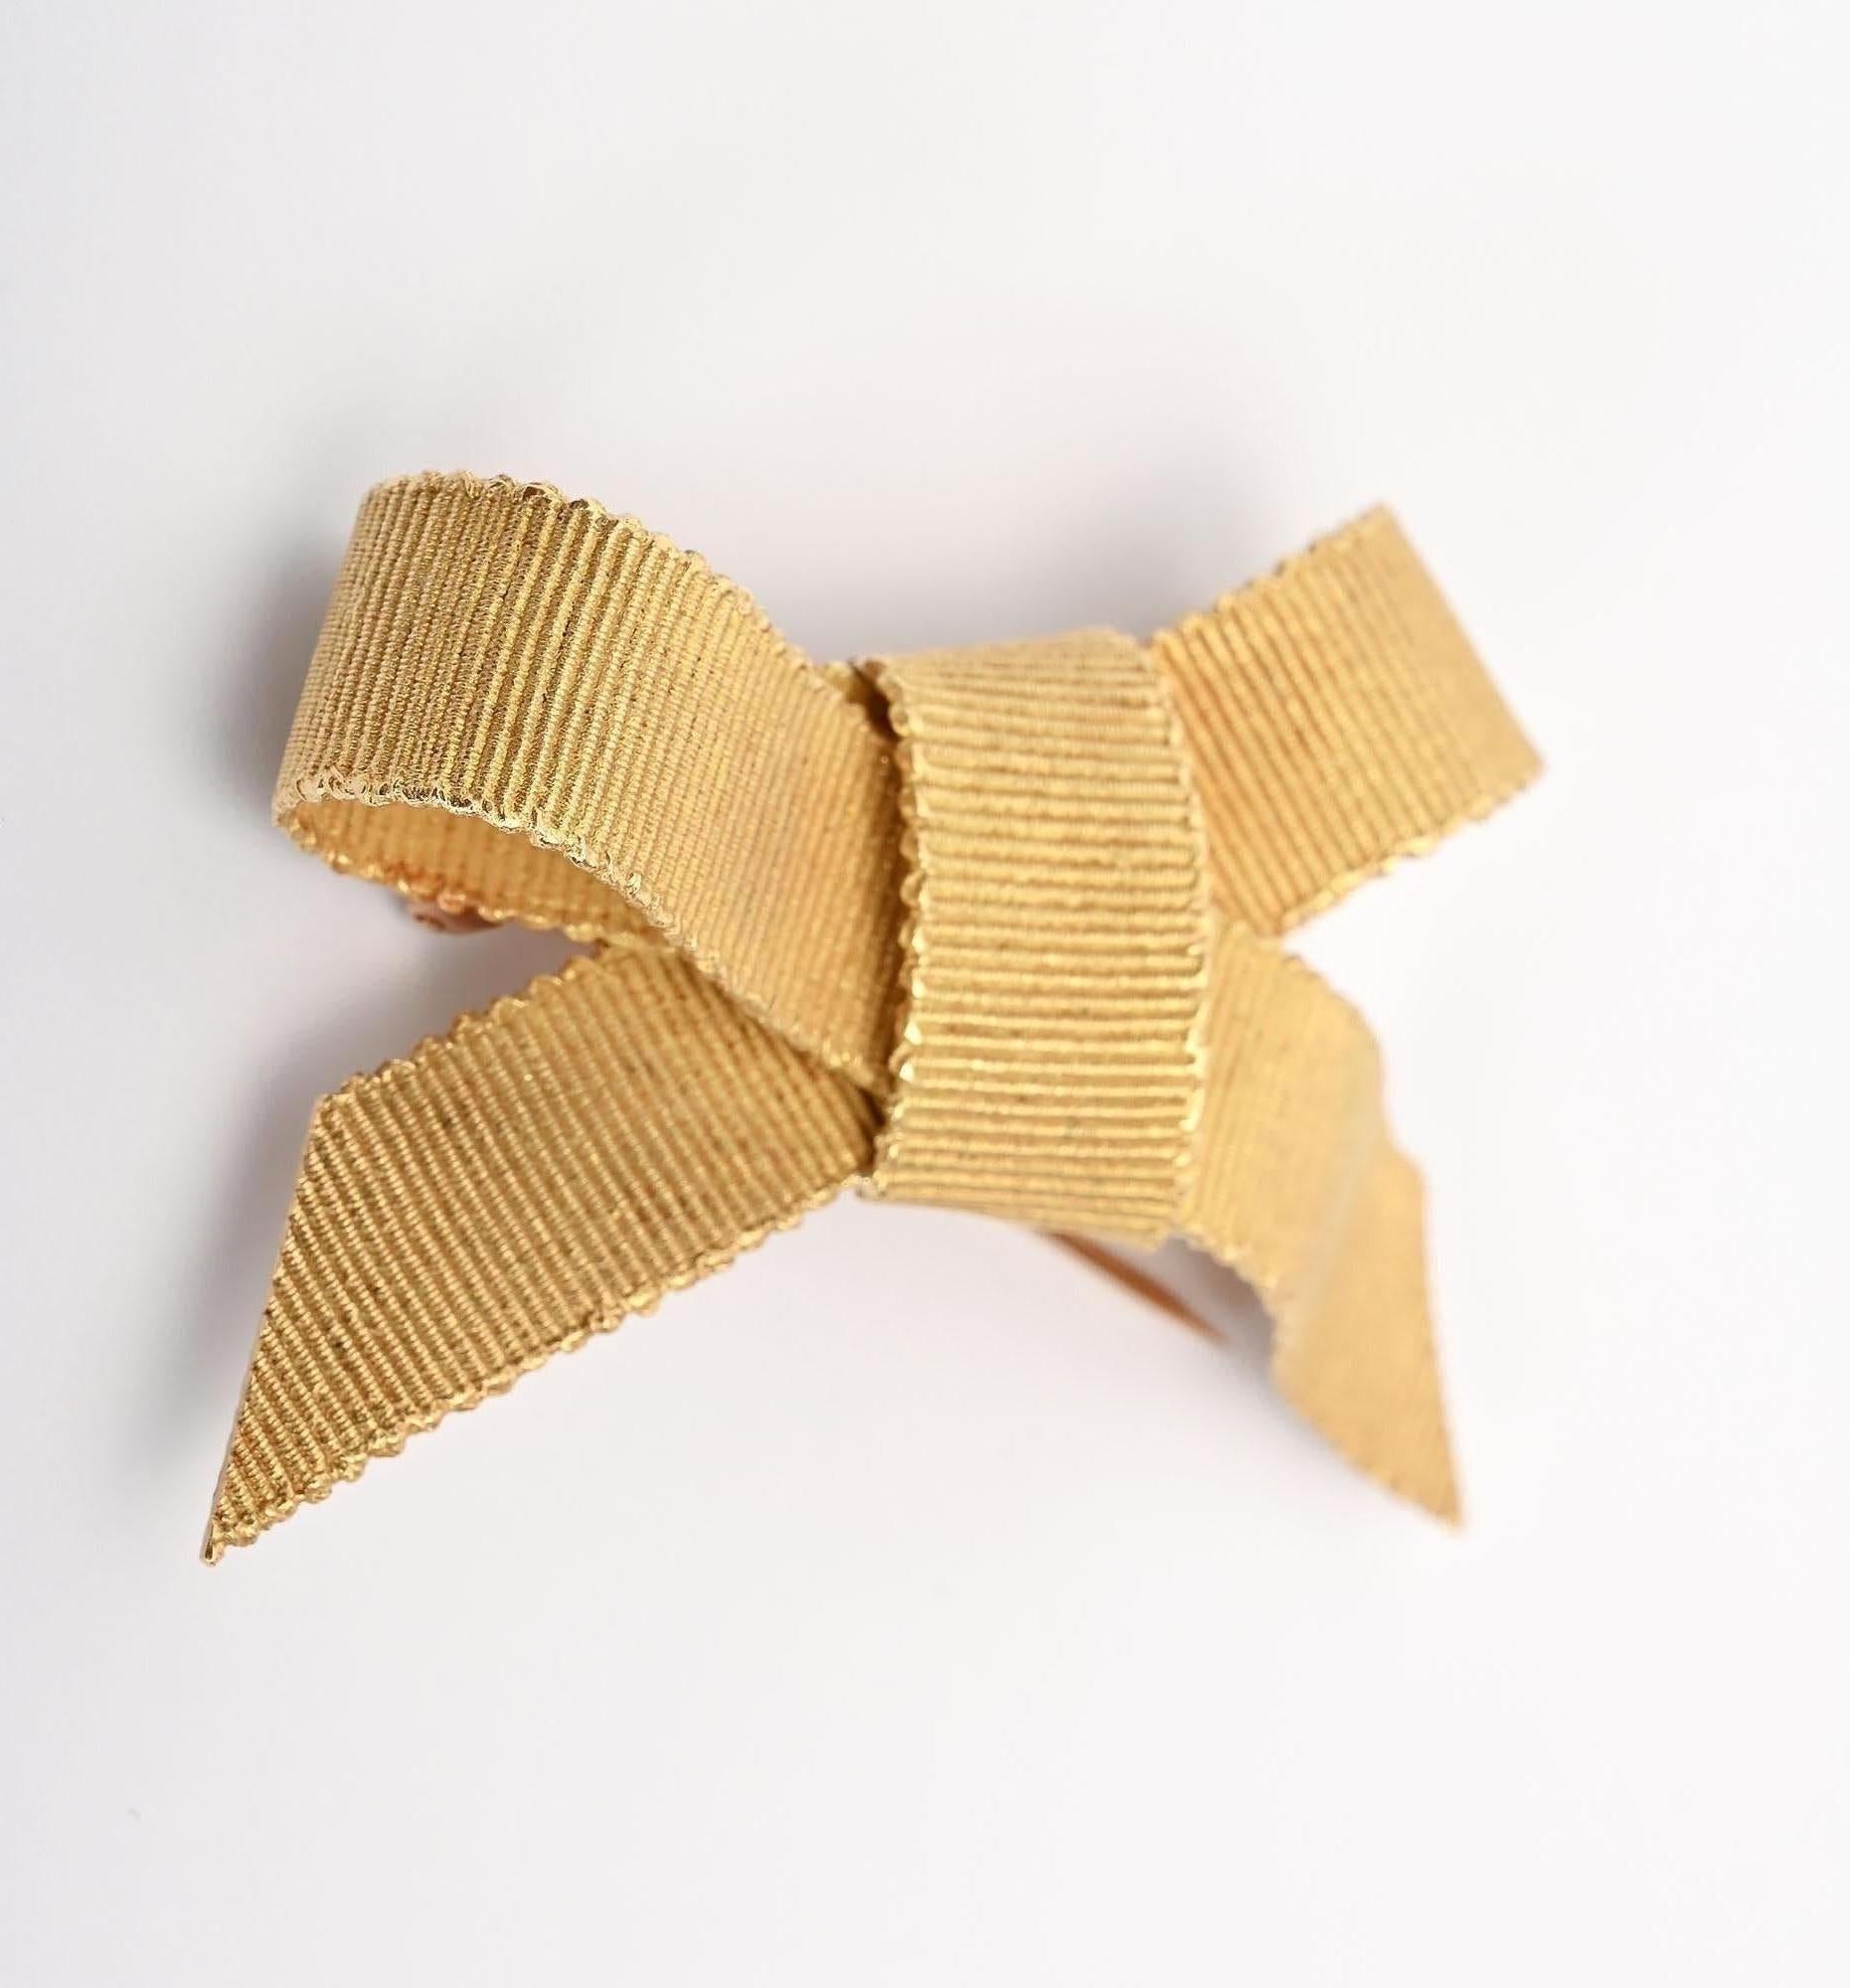 Exquisitely detailed  Bow brooch by Bulgari in which the 18 karat gold is finely textured to look like grosgrain ribbon.  The brooch is 2 3/4 inches wide and 1 1/2